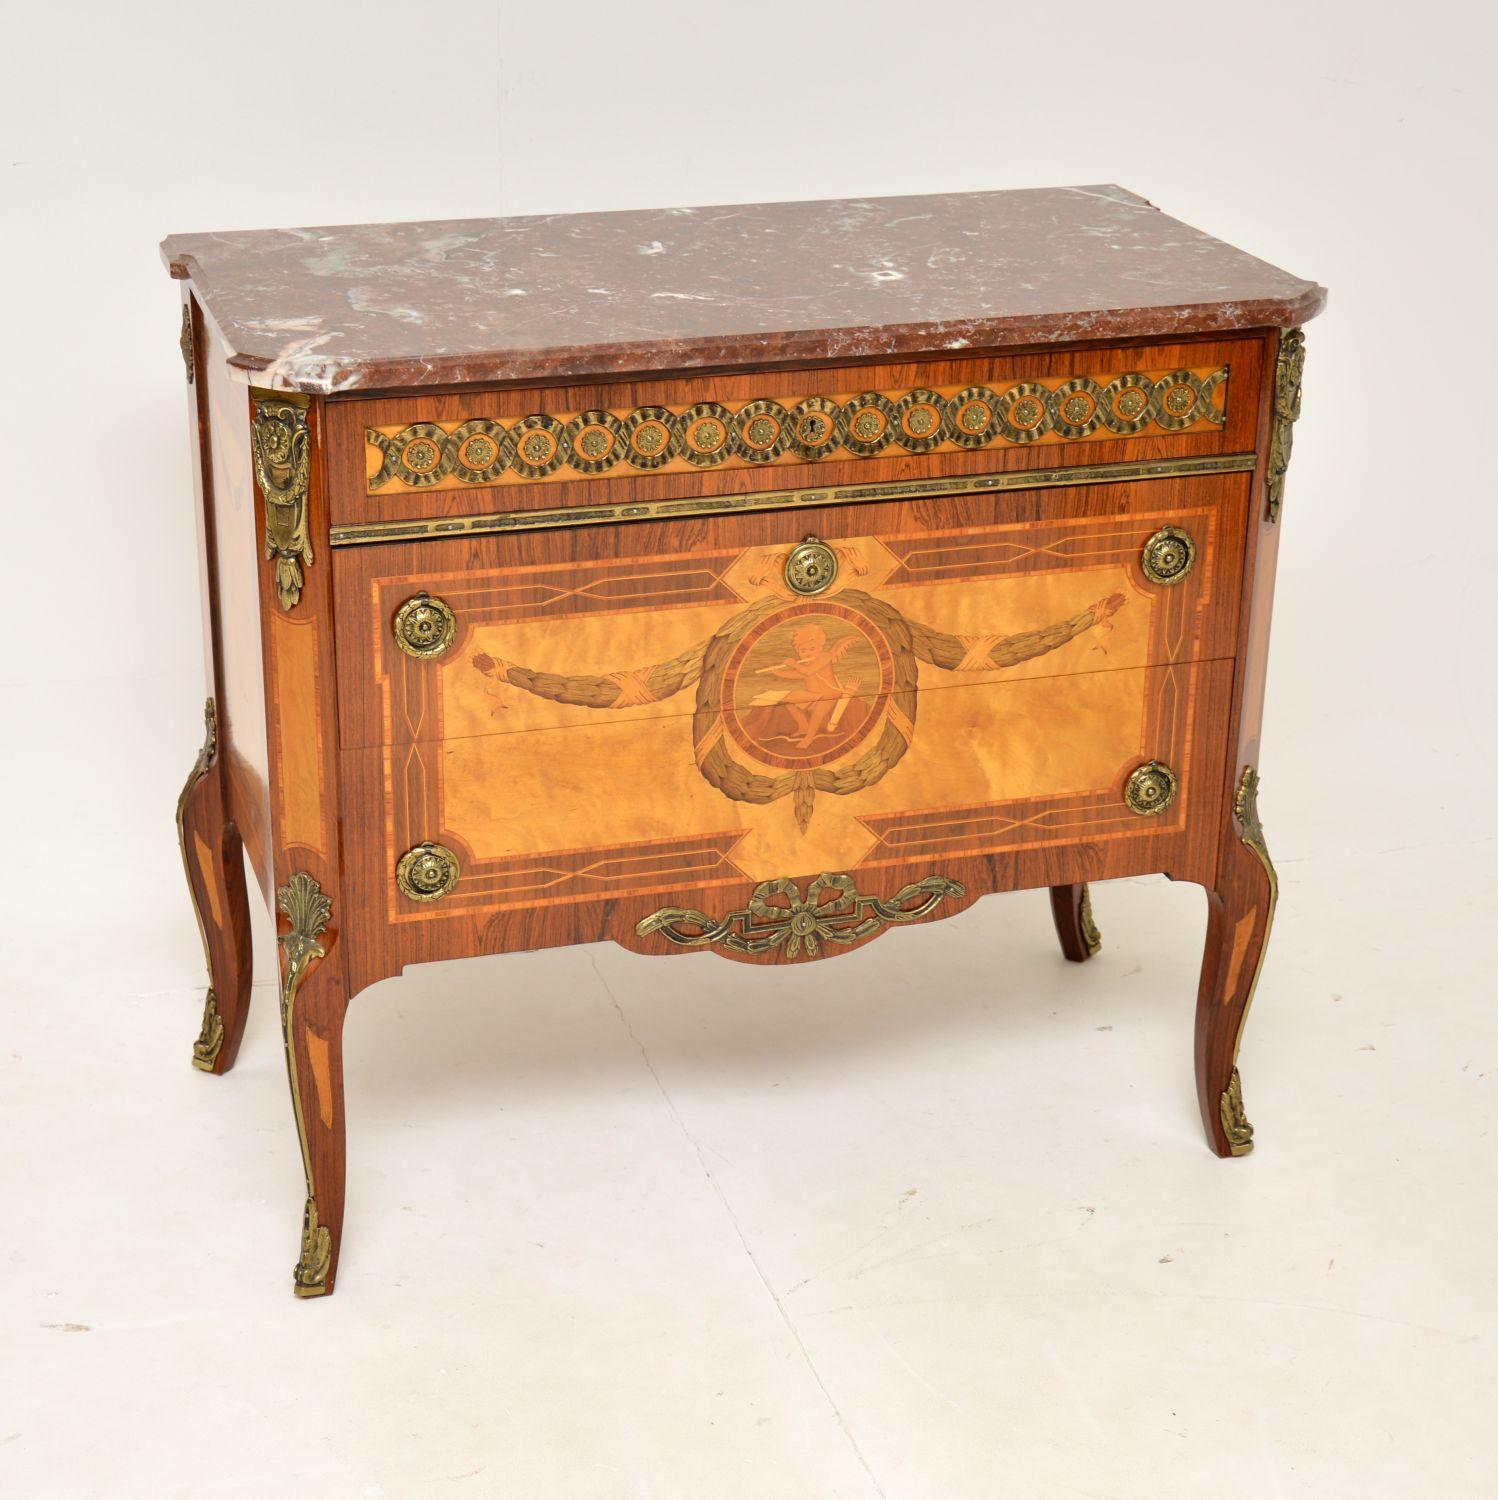 A stunning antique Swedish marble top commode, with exquisite marquetry inlay. This was recently imported from Sweden, it dates from around the 1930’s.

The quality is superb, with absolutely gorgeous inlaid designs and contrasting woods. There